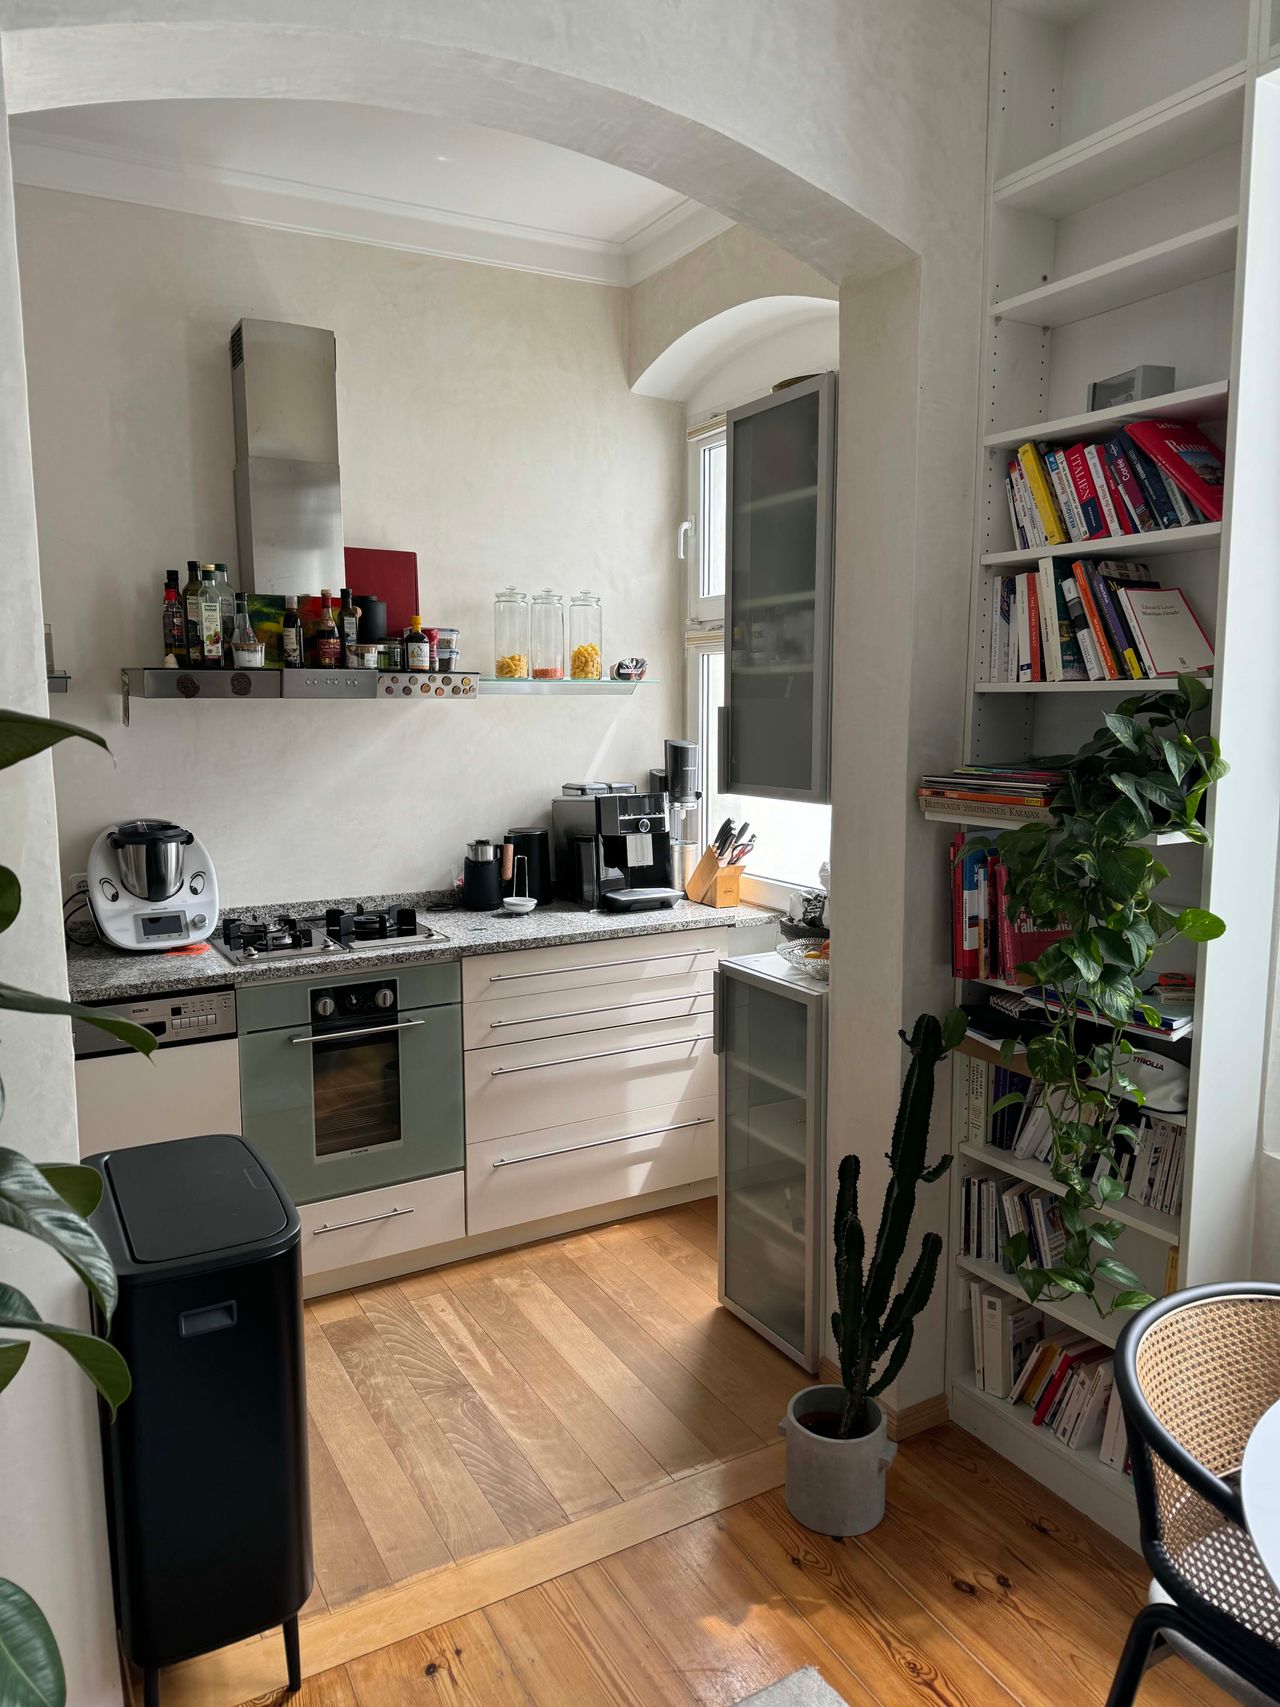 Charming 2-Room Apartment in Berlin Prenzlauer Berg for Sublet